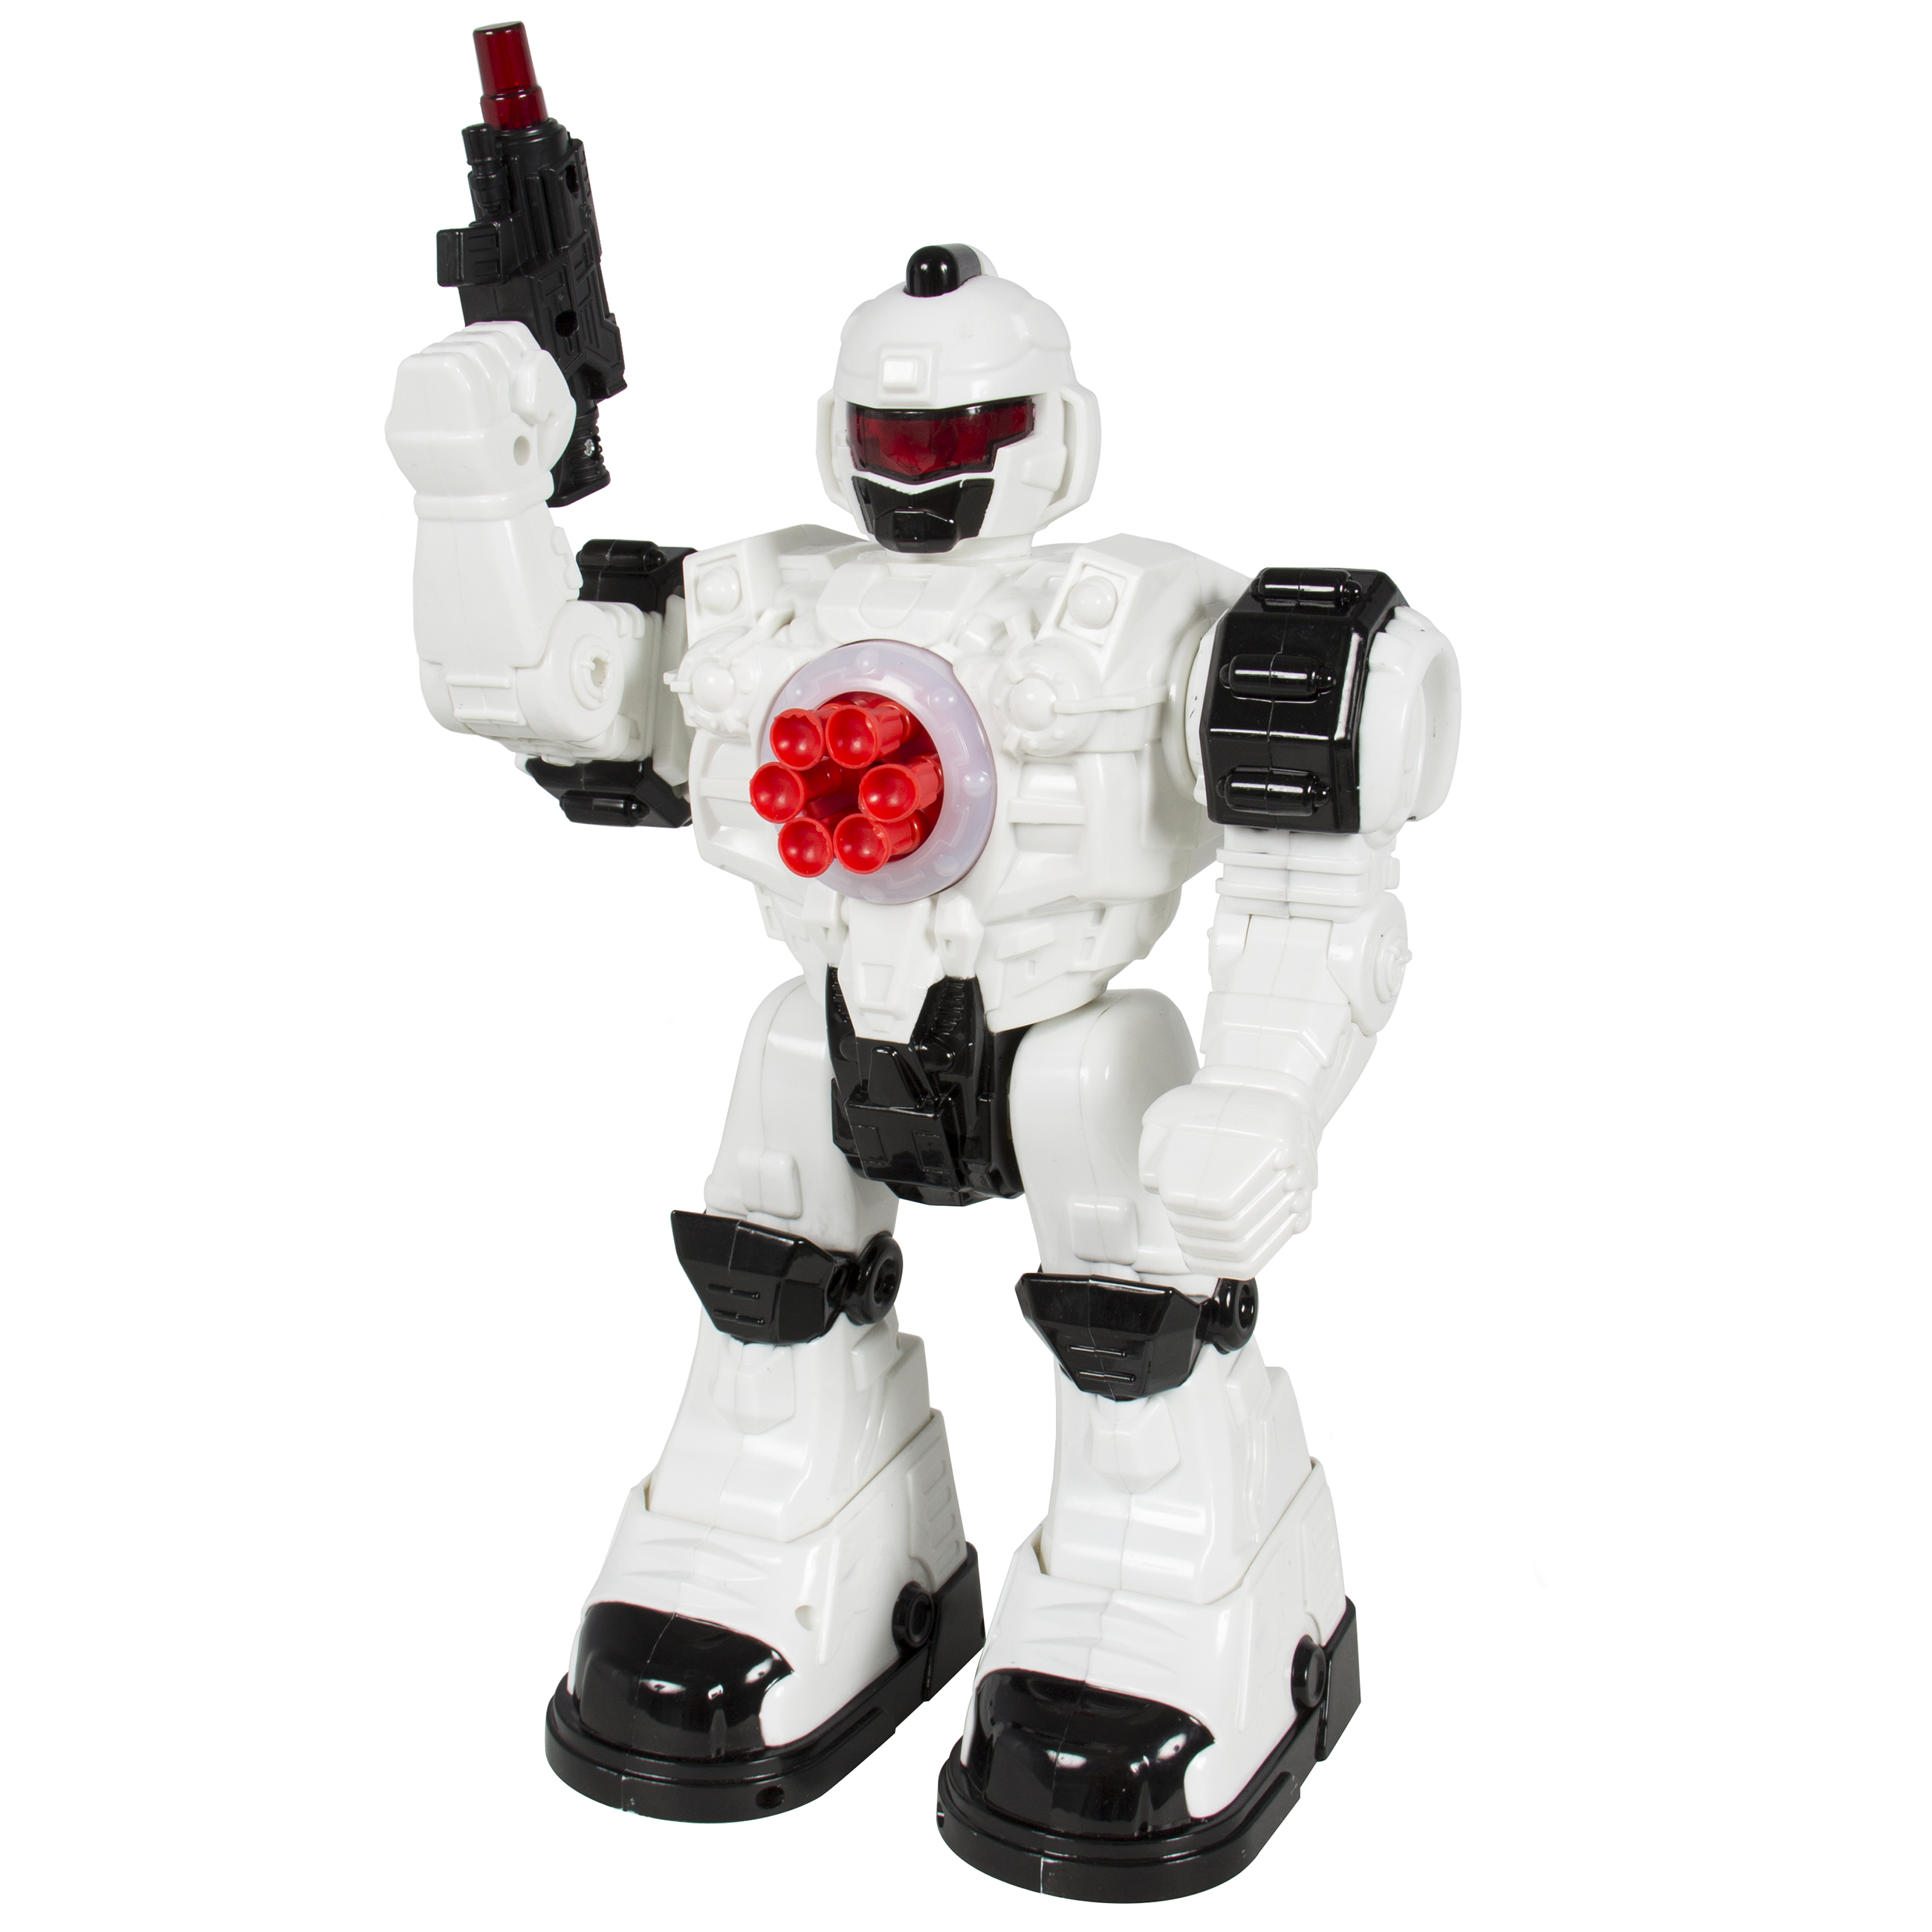 Best Choice Products Kids Remote Control Fight Battle Robot Toy w/ Walking, Dancing, Shooting Actions, Lights, Sounds - image 3 of 5